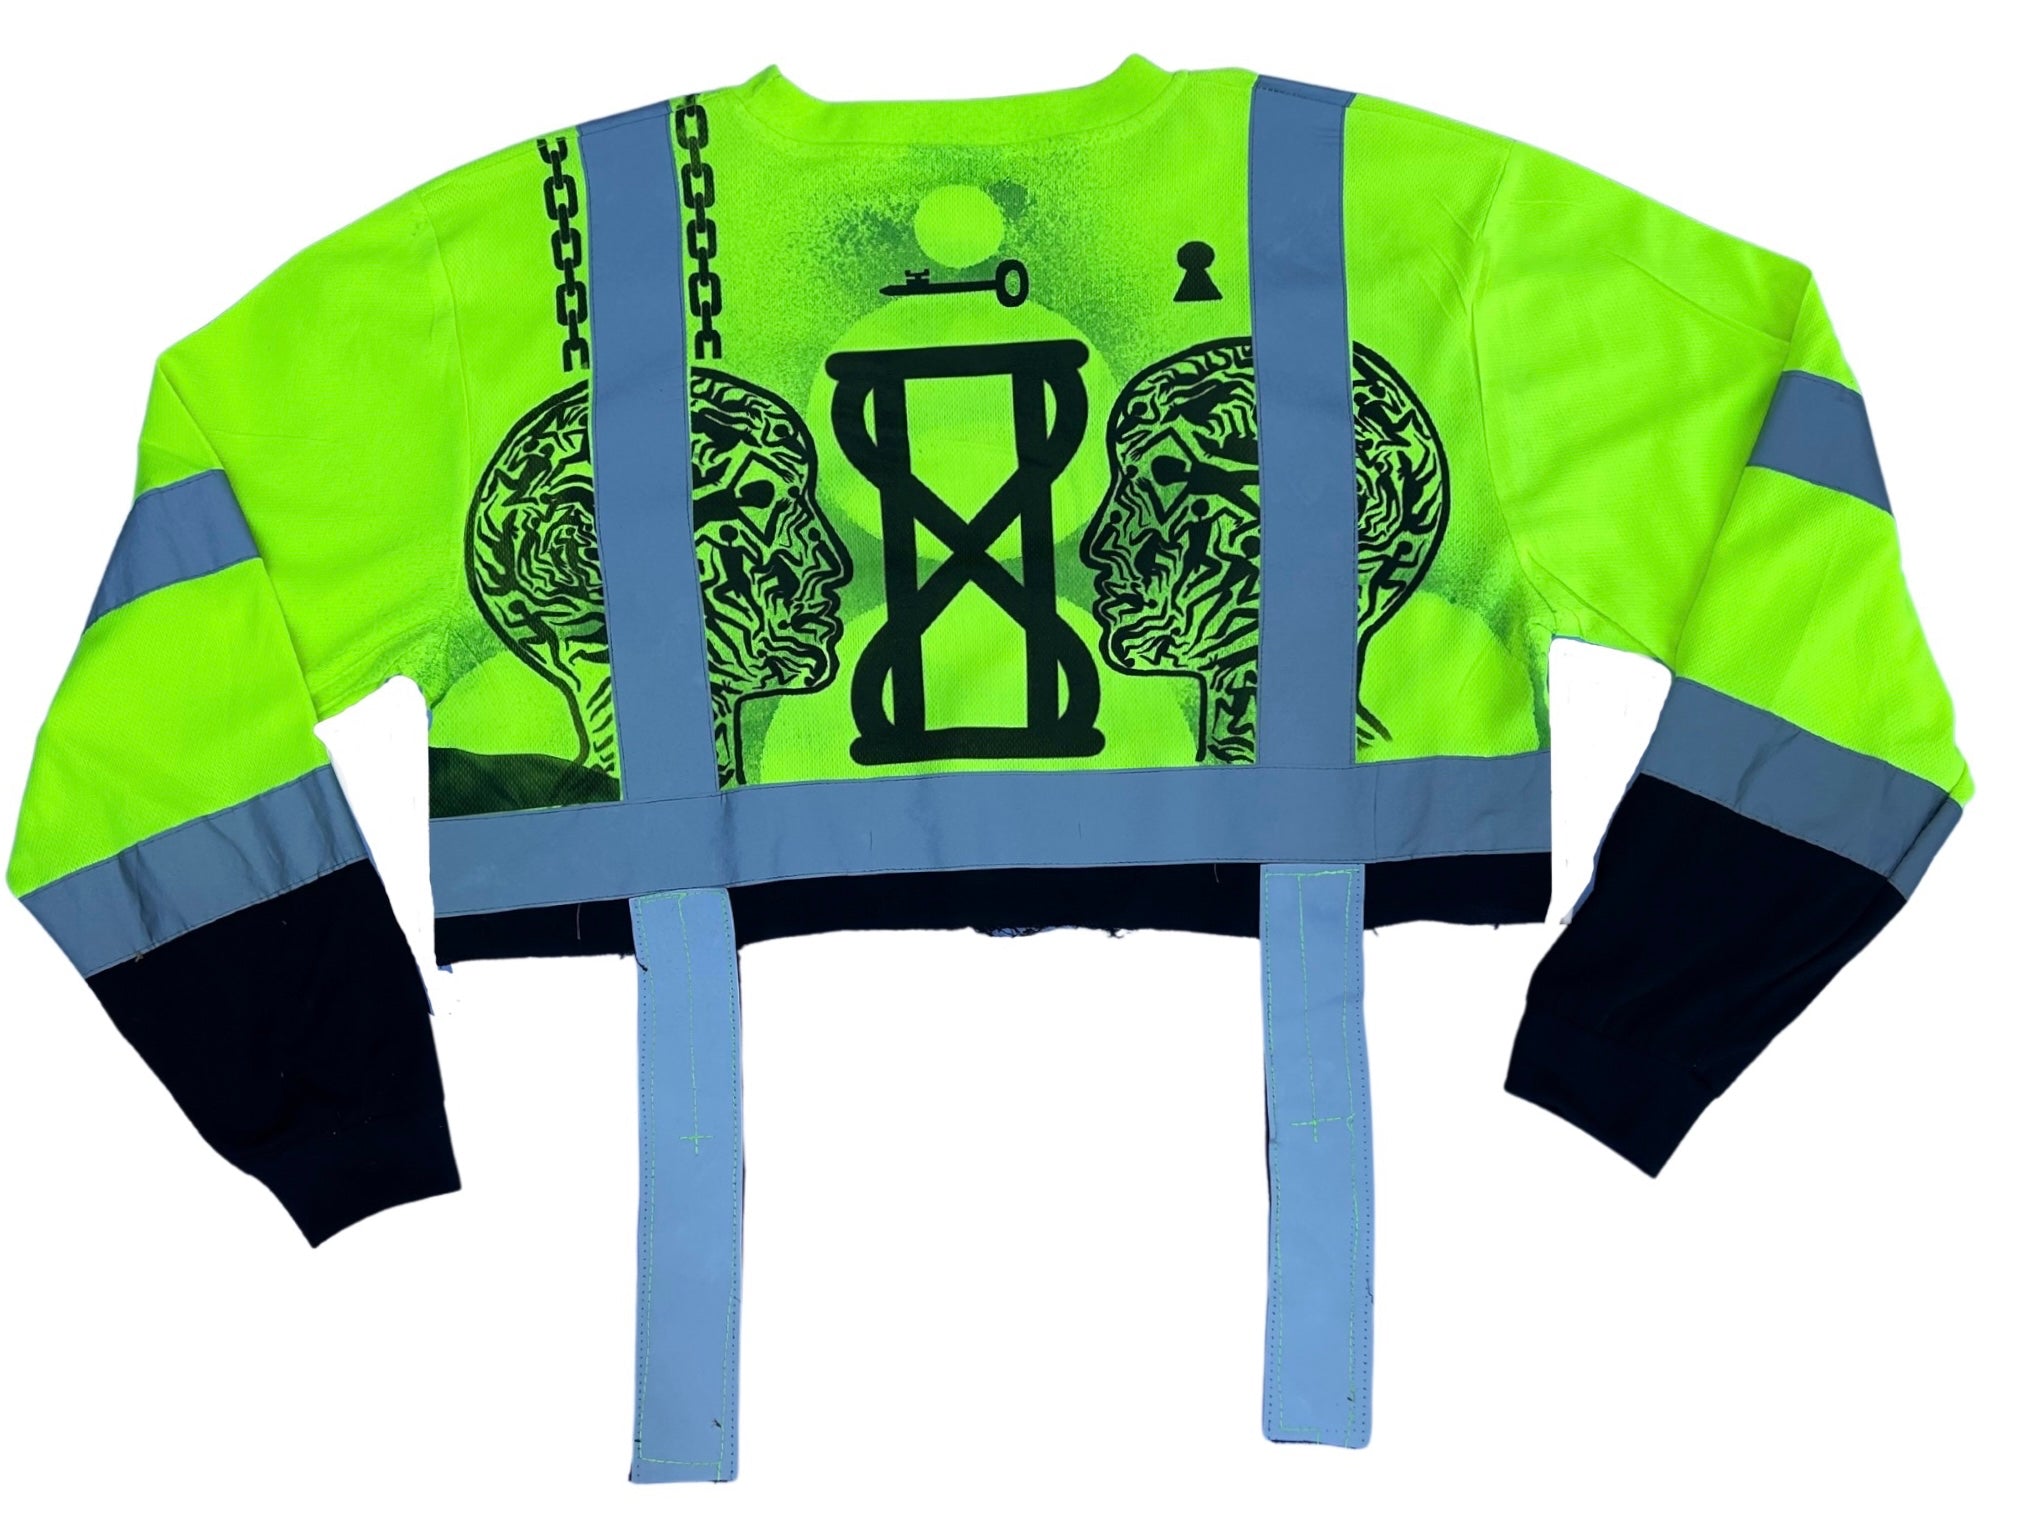 HAH VIS high visibility long sleeve plus reflective tails